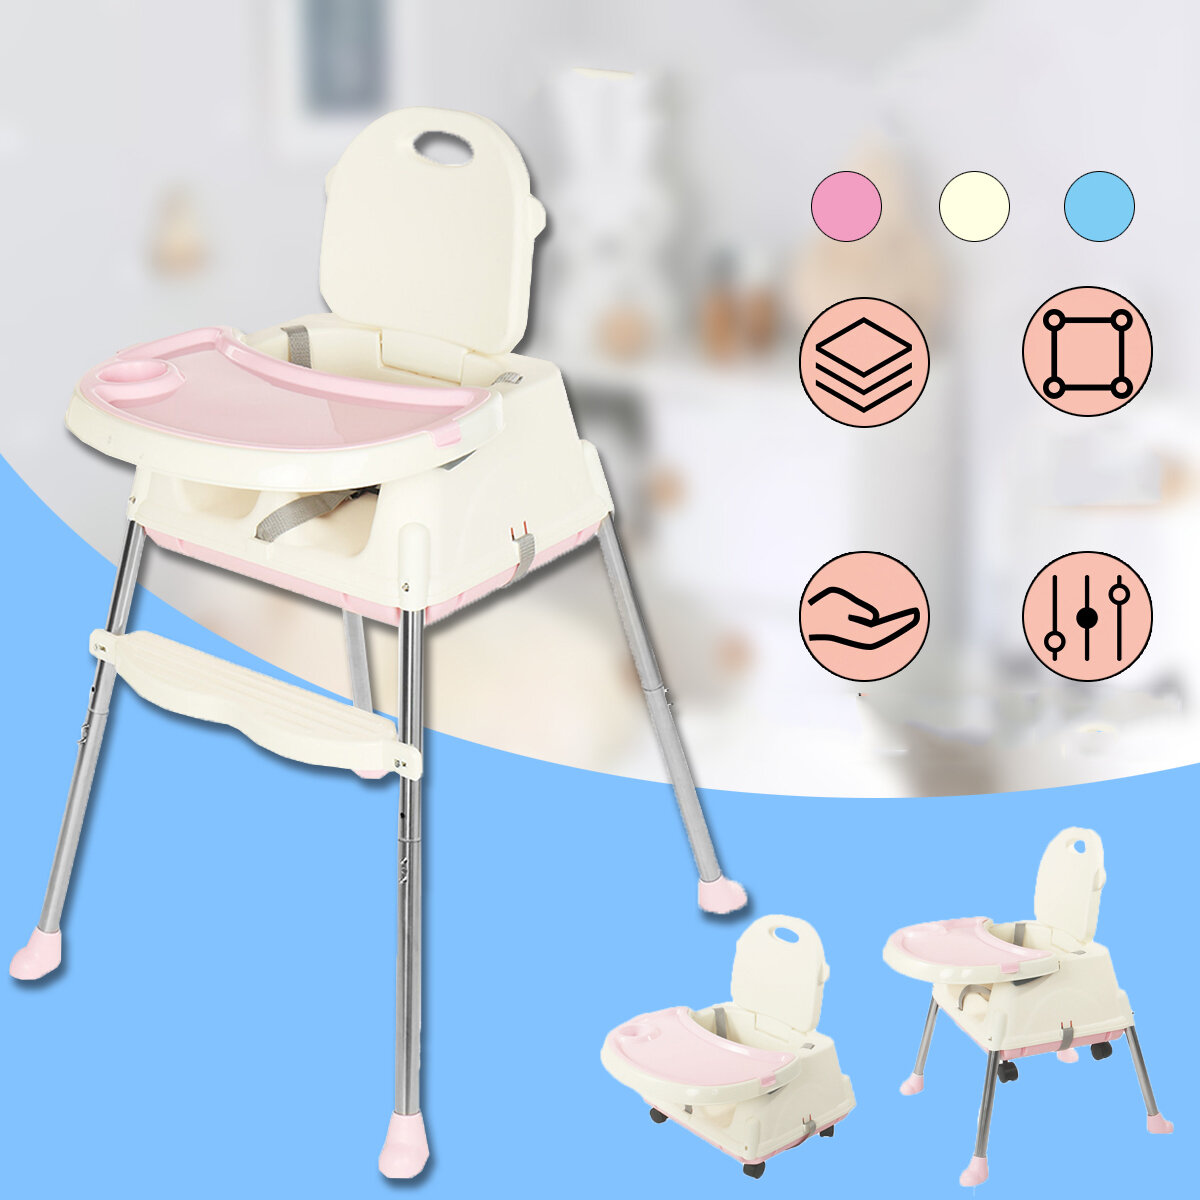 Image of KUDOSALE 3 in 1 Adjustable Baby High Chair Table Convertible Play Seat Booster Toddler Feeding with Tray Wheel